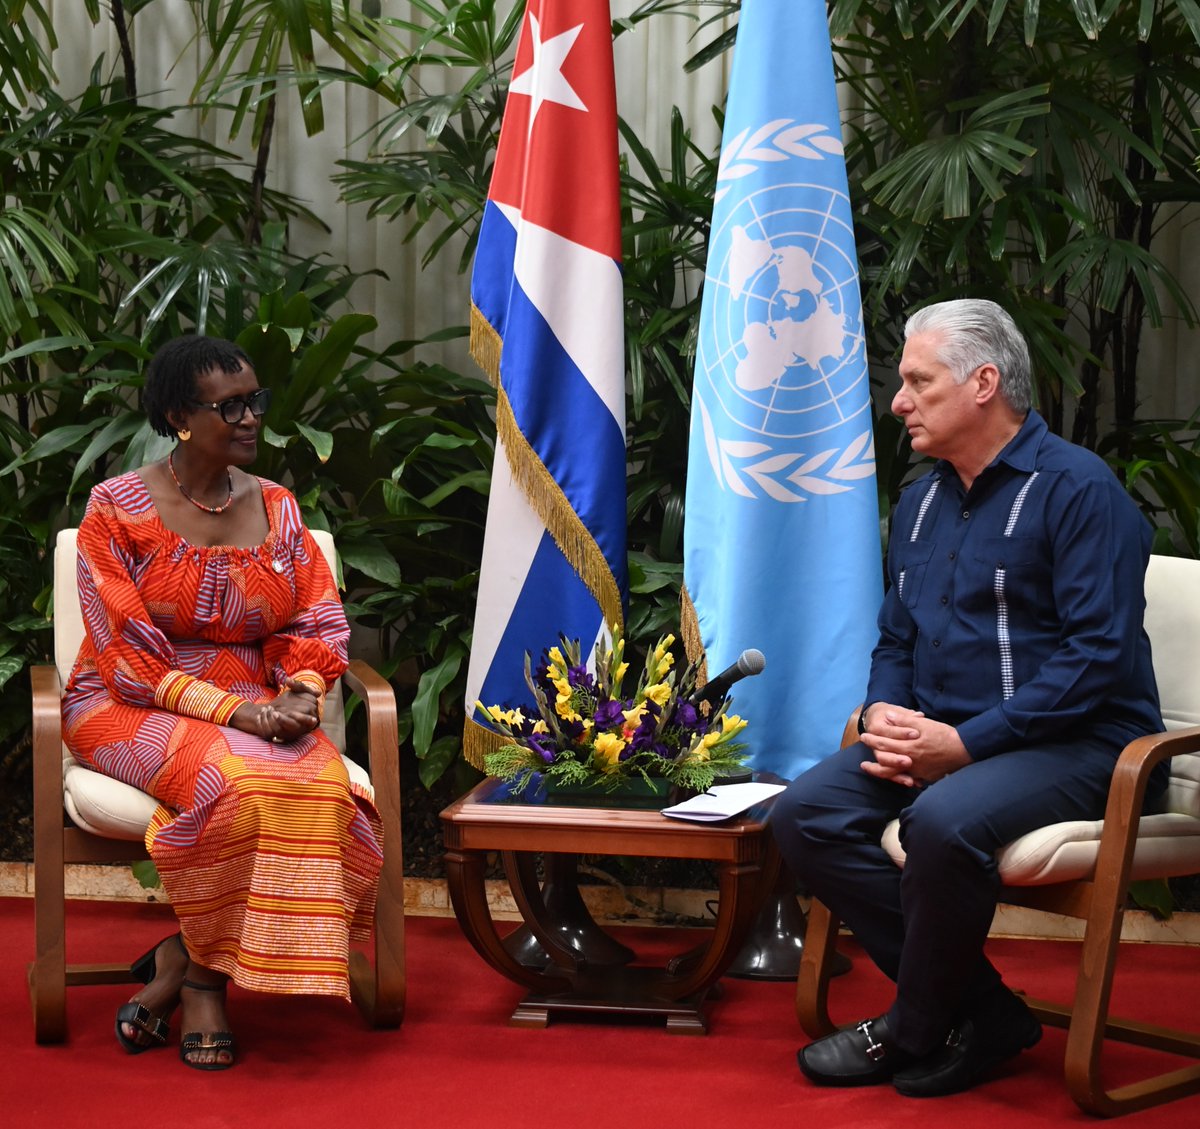 I agreed with @PresidenciaCuba 🇨🇺 that big pharma monopolies are a big barrier to equitable access to life saving health tech for millions around the world, specially in developing countries. #endAIDS #HealthForAll #CubaPorLaVida